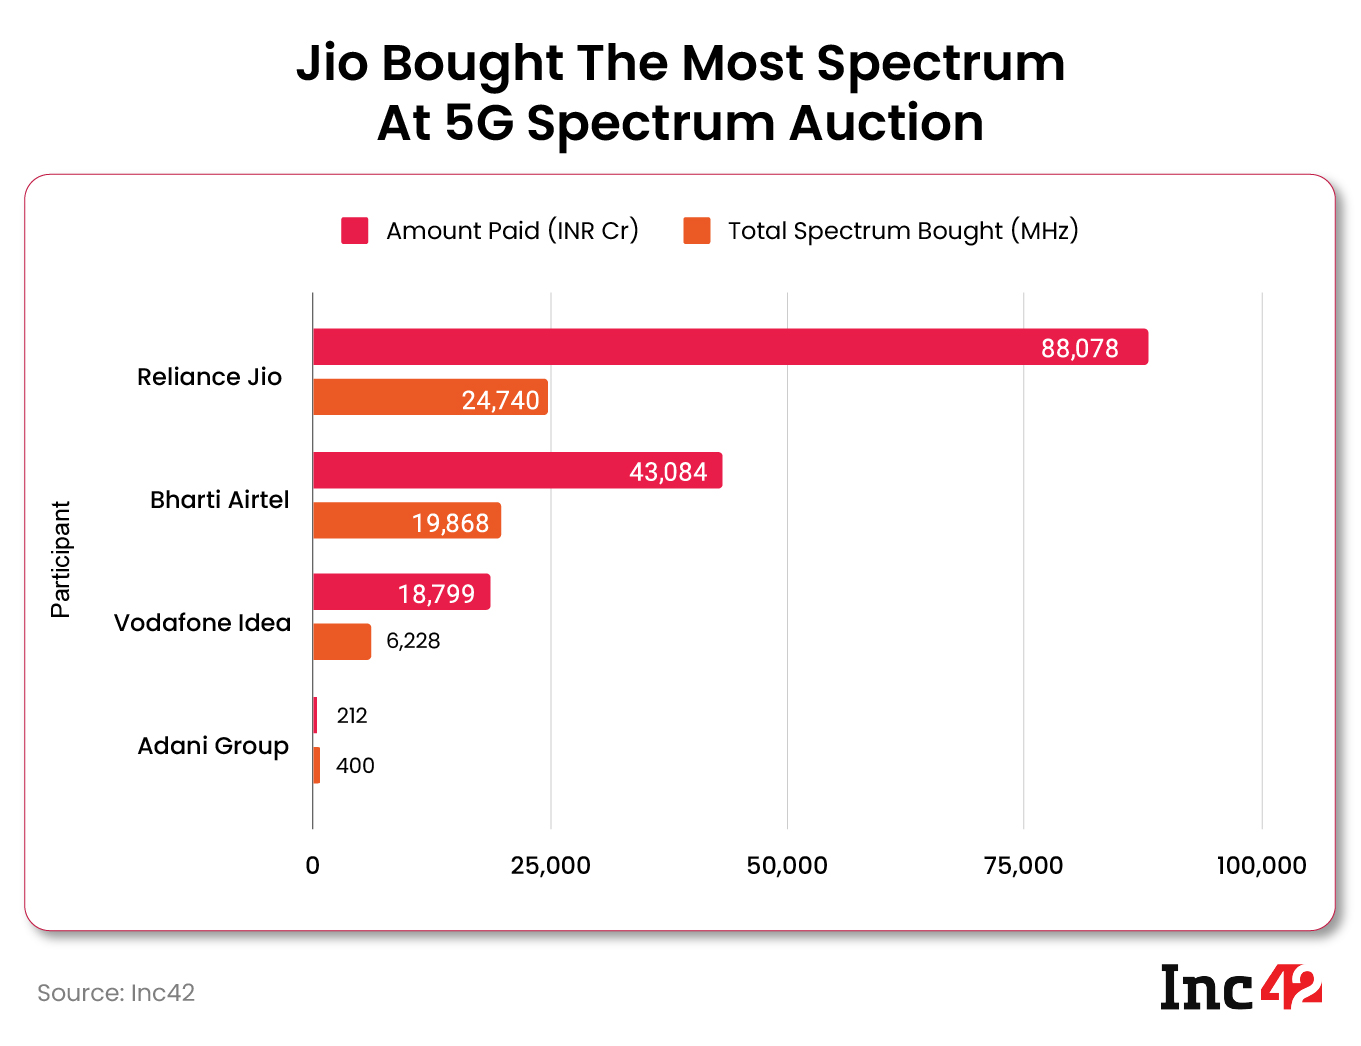 Jio was the biggest spender at 5G spectrum auction